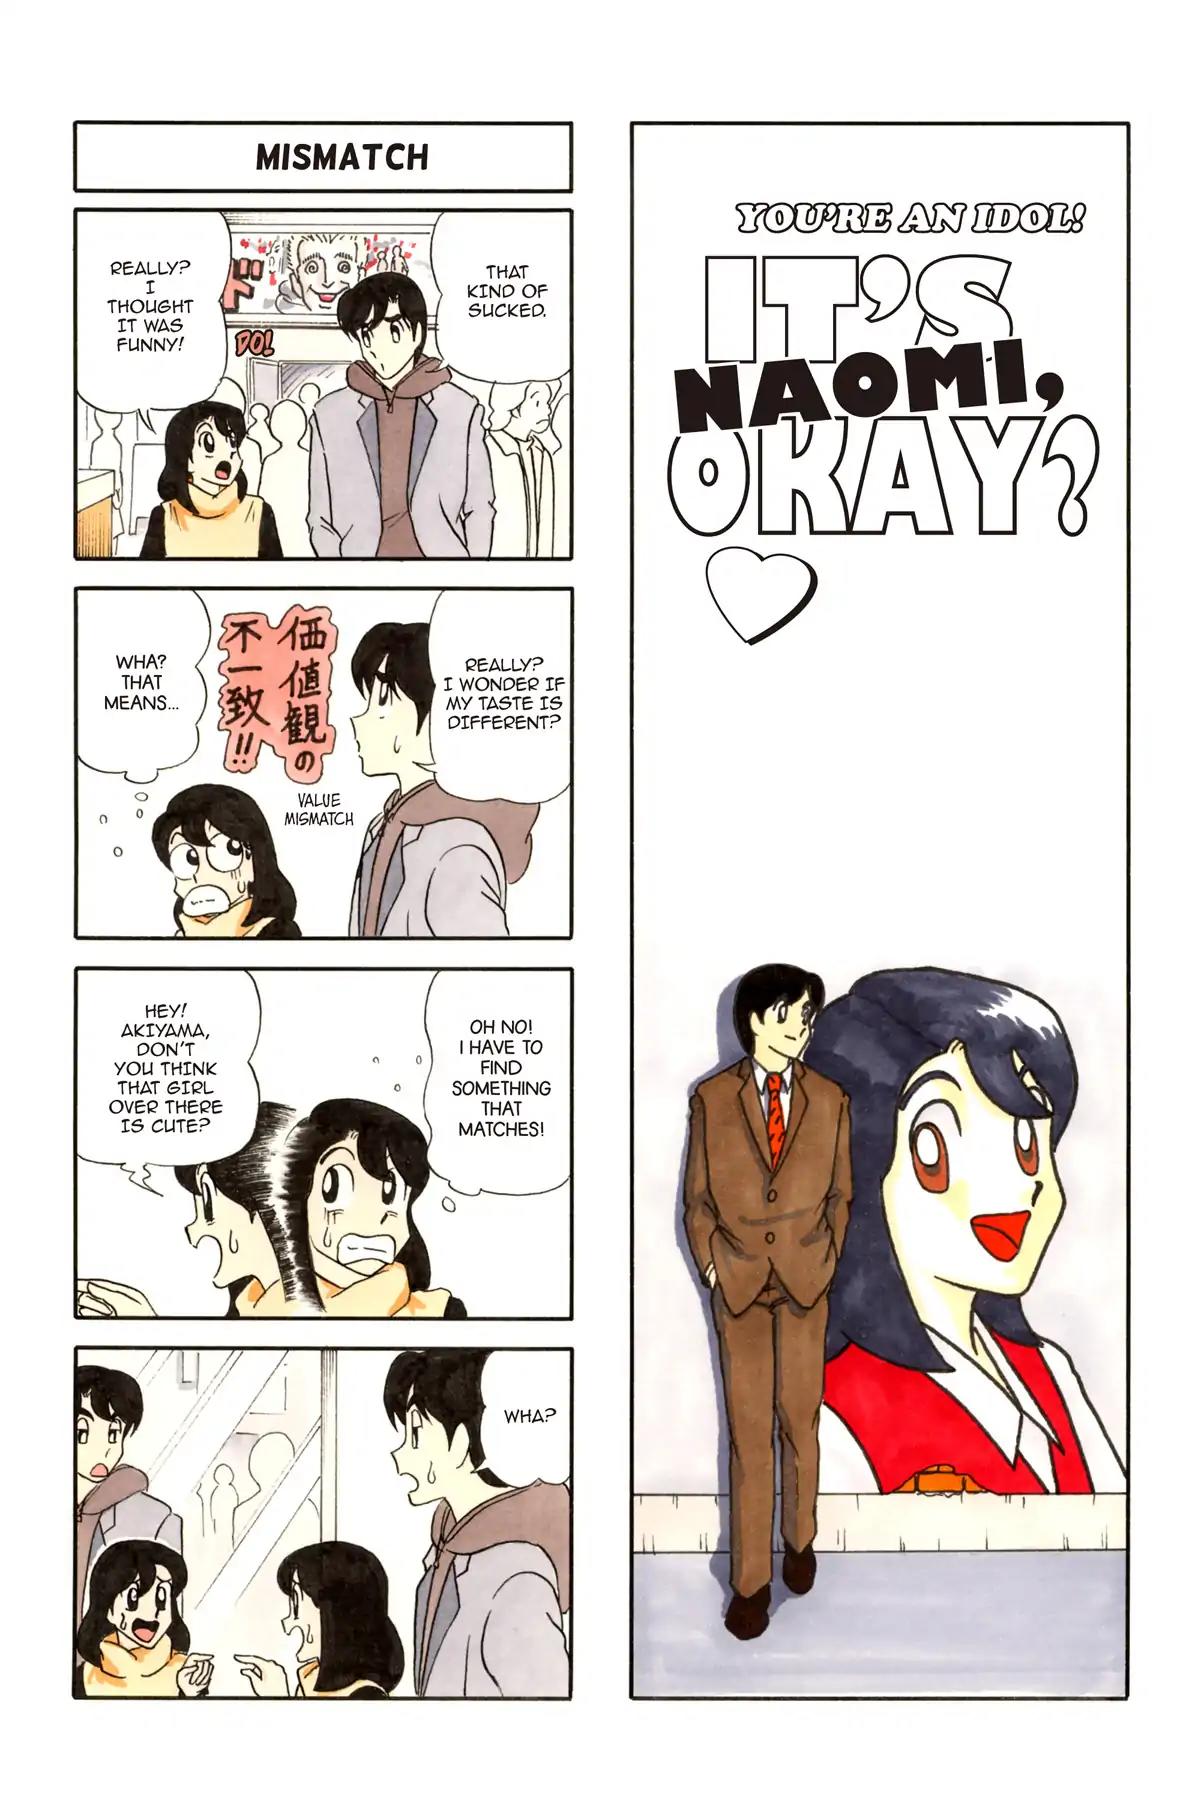 It's Naomi, Okay? After 16 Vol 1 Chapter 27